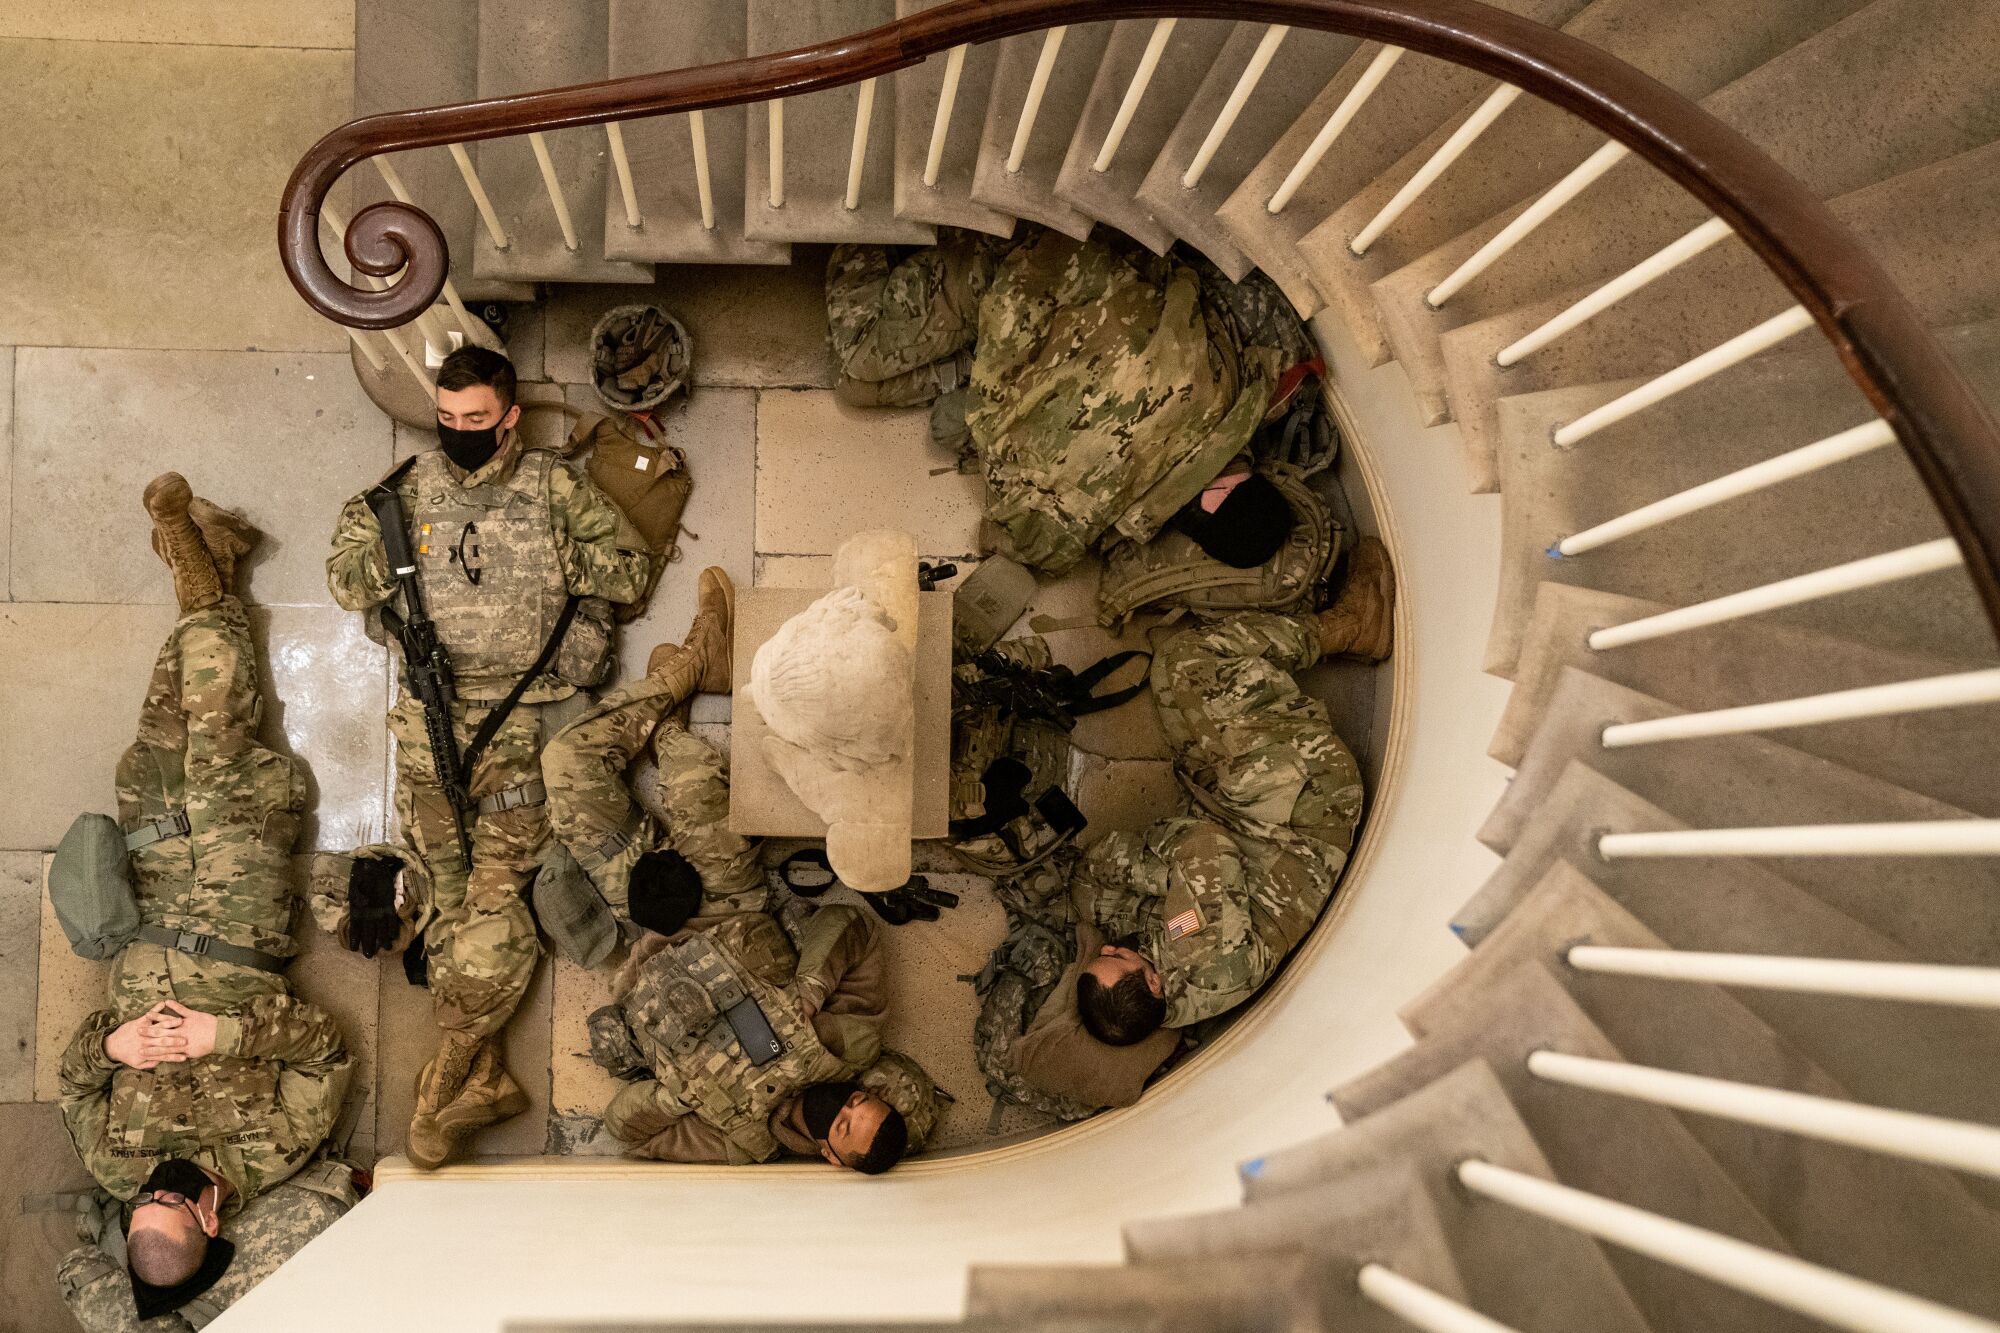 Service members in uniform sleep in an alcove below a curved stair